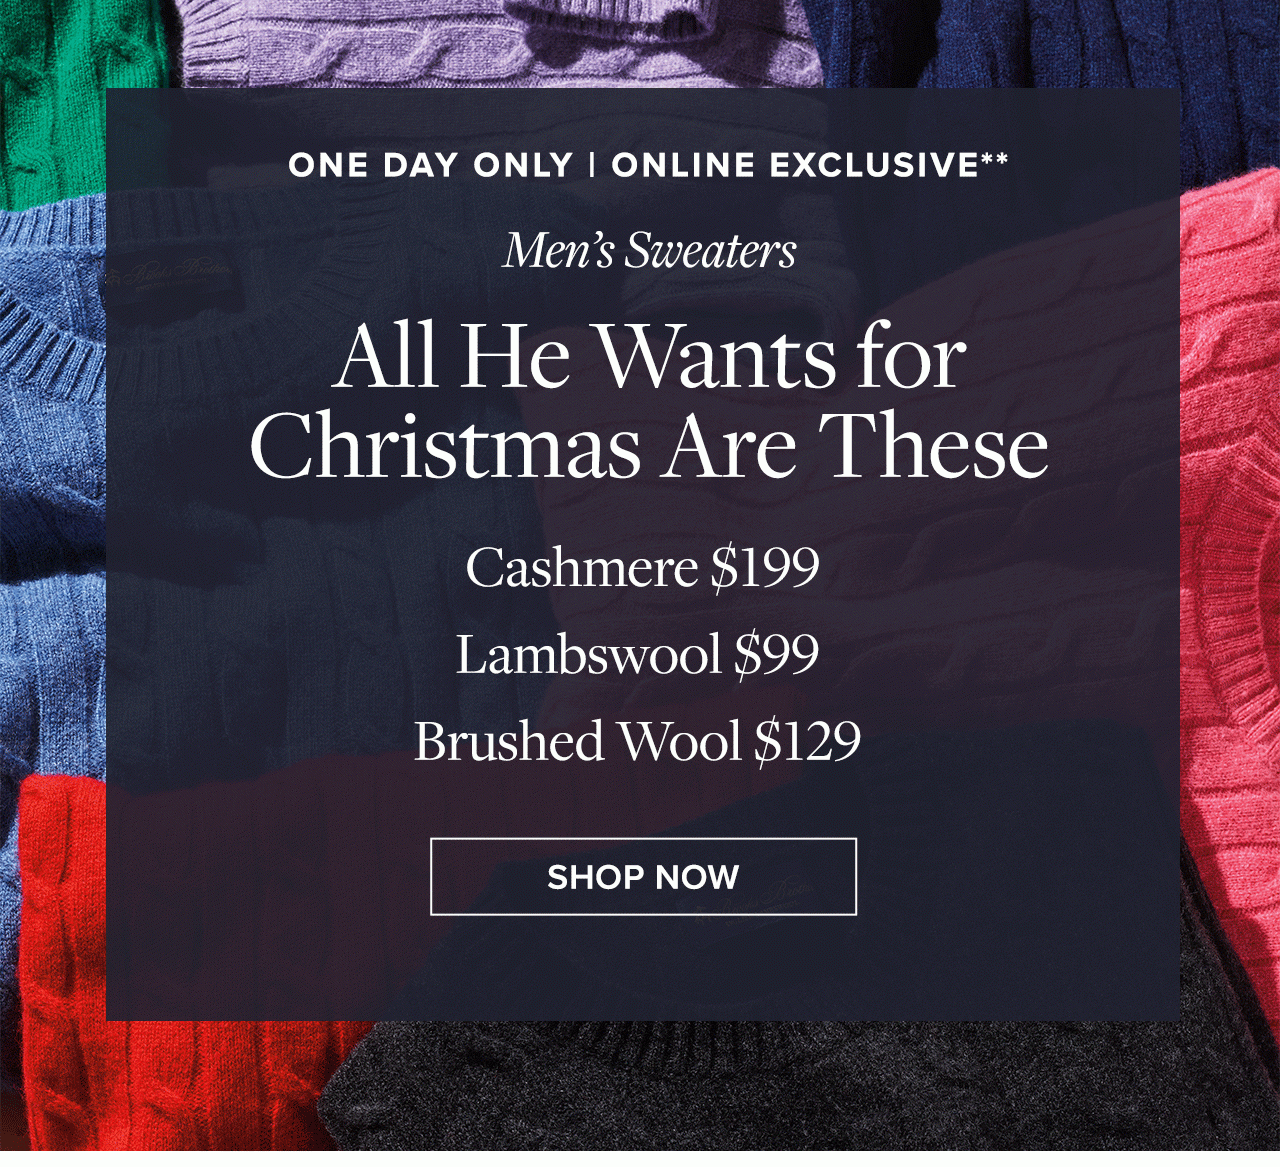 One day only | online exclusive. Men's sweaters. Shop Now